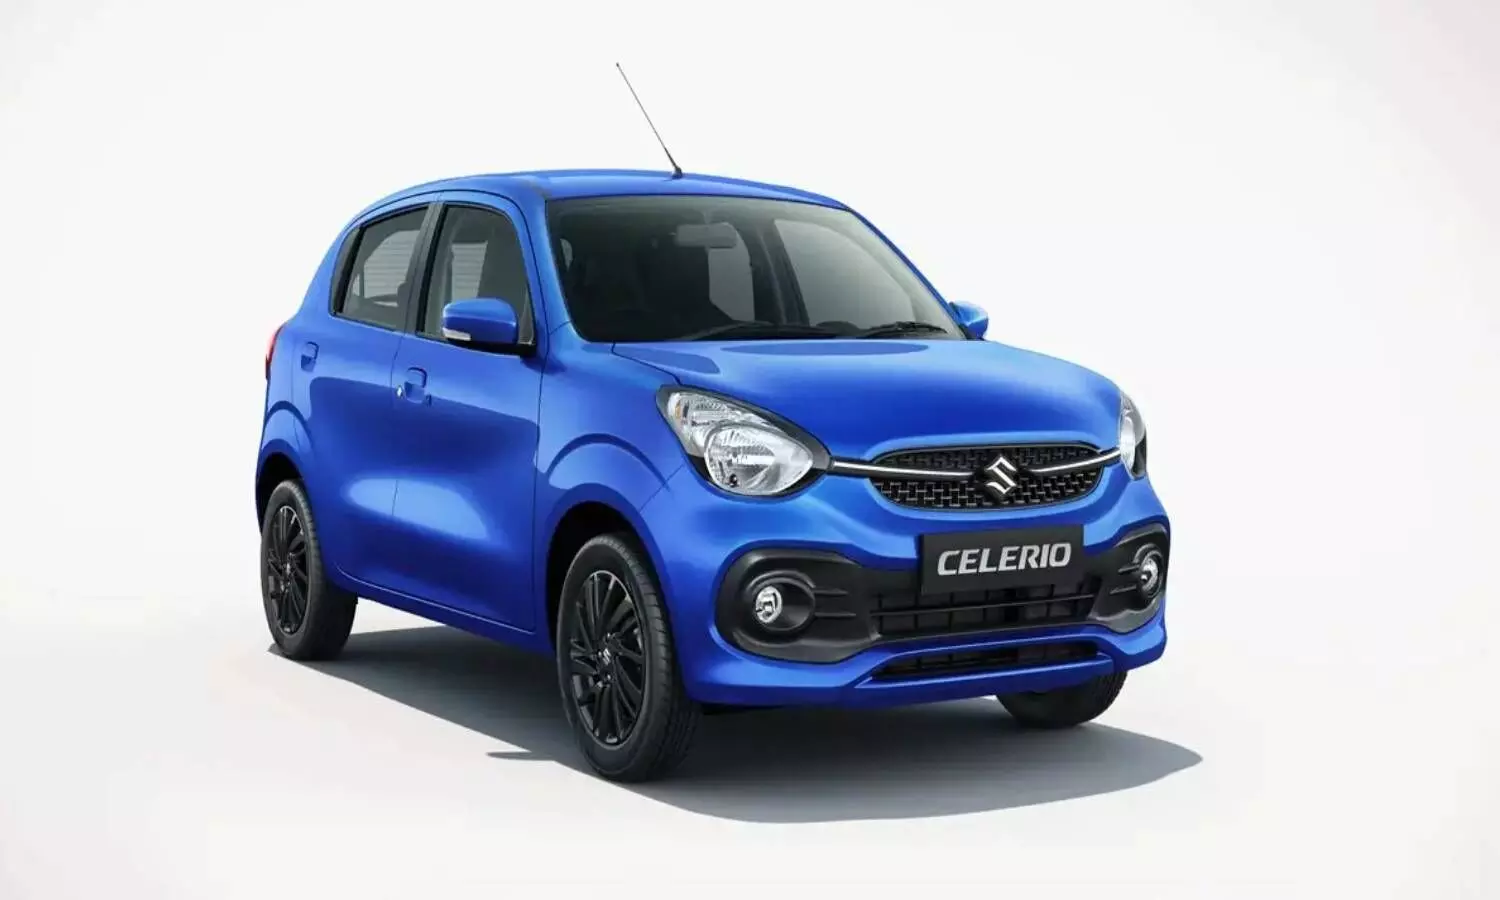 Bizz Buzz explainer: What to expect from Maruti Suzuki’s all-new hatchback Celerio